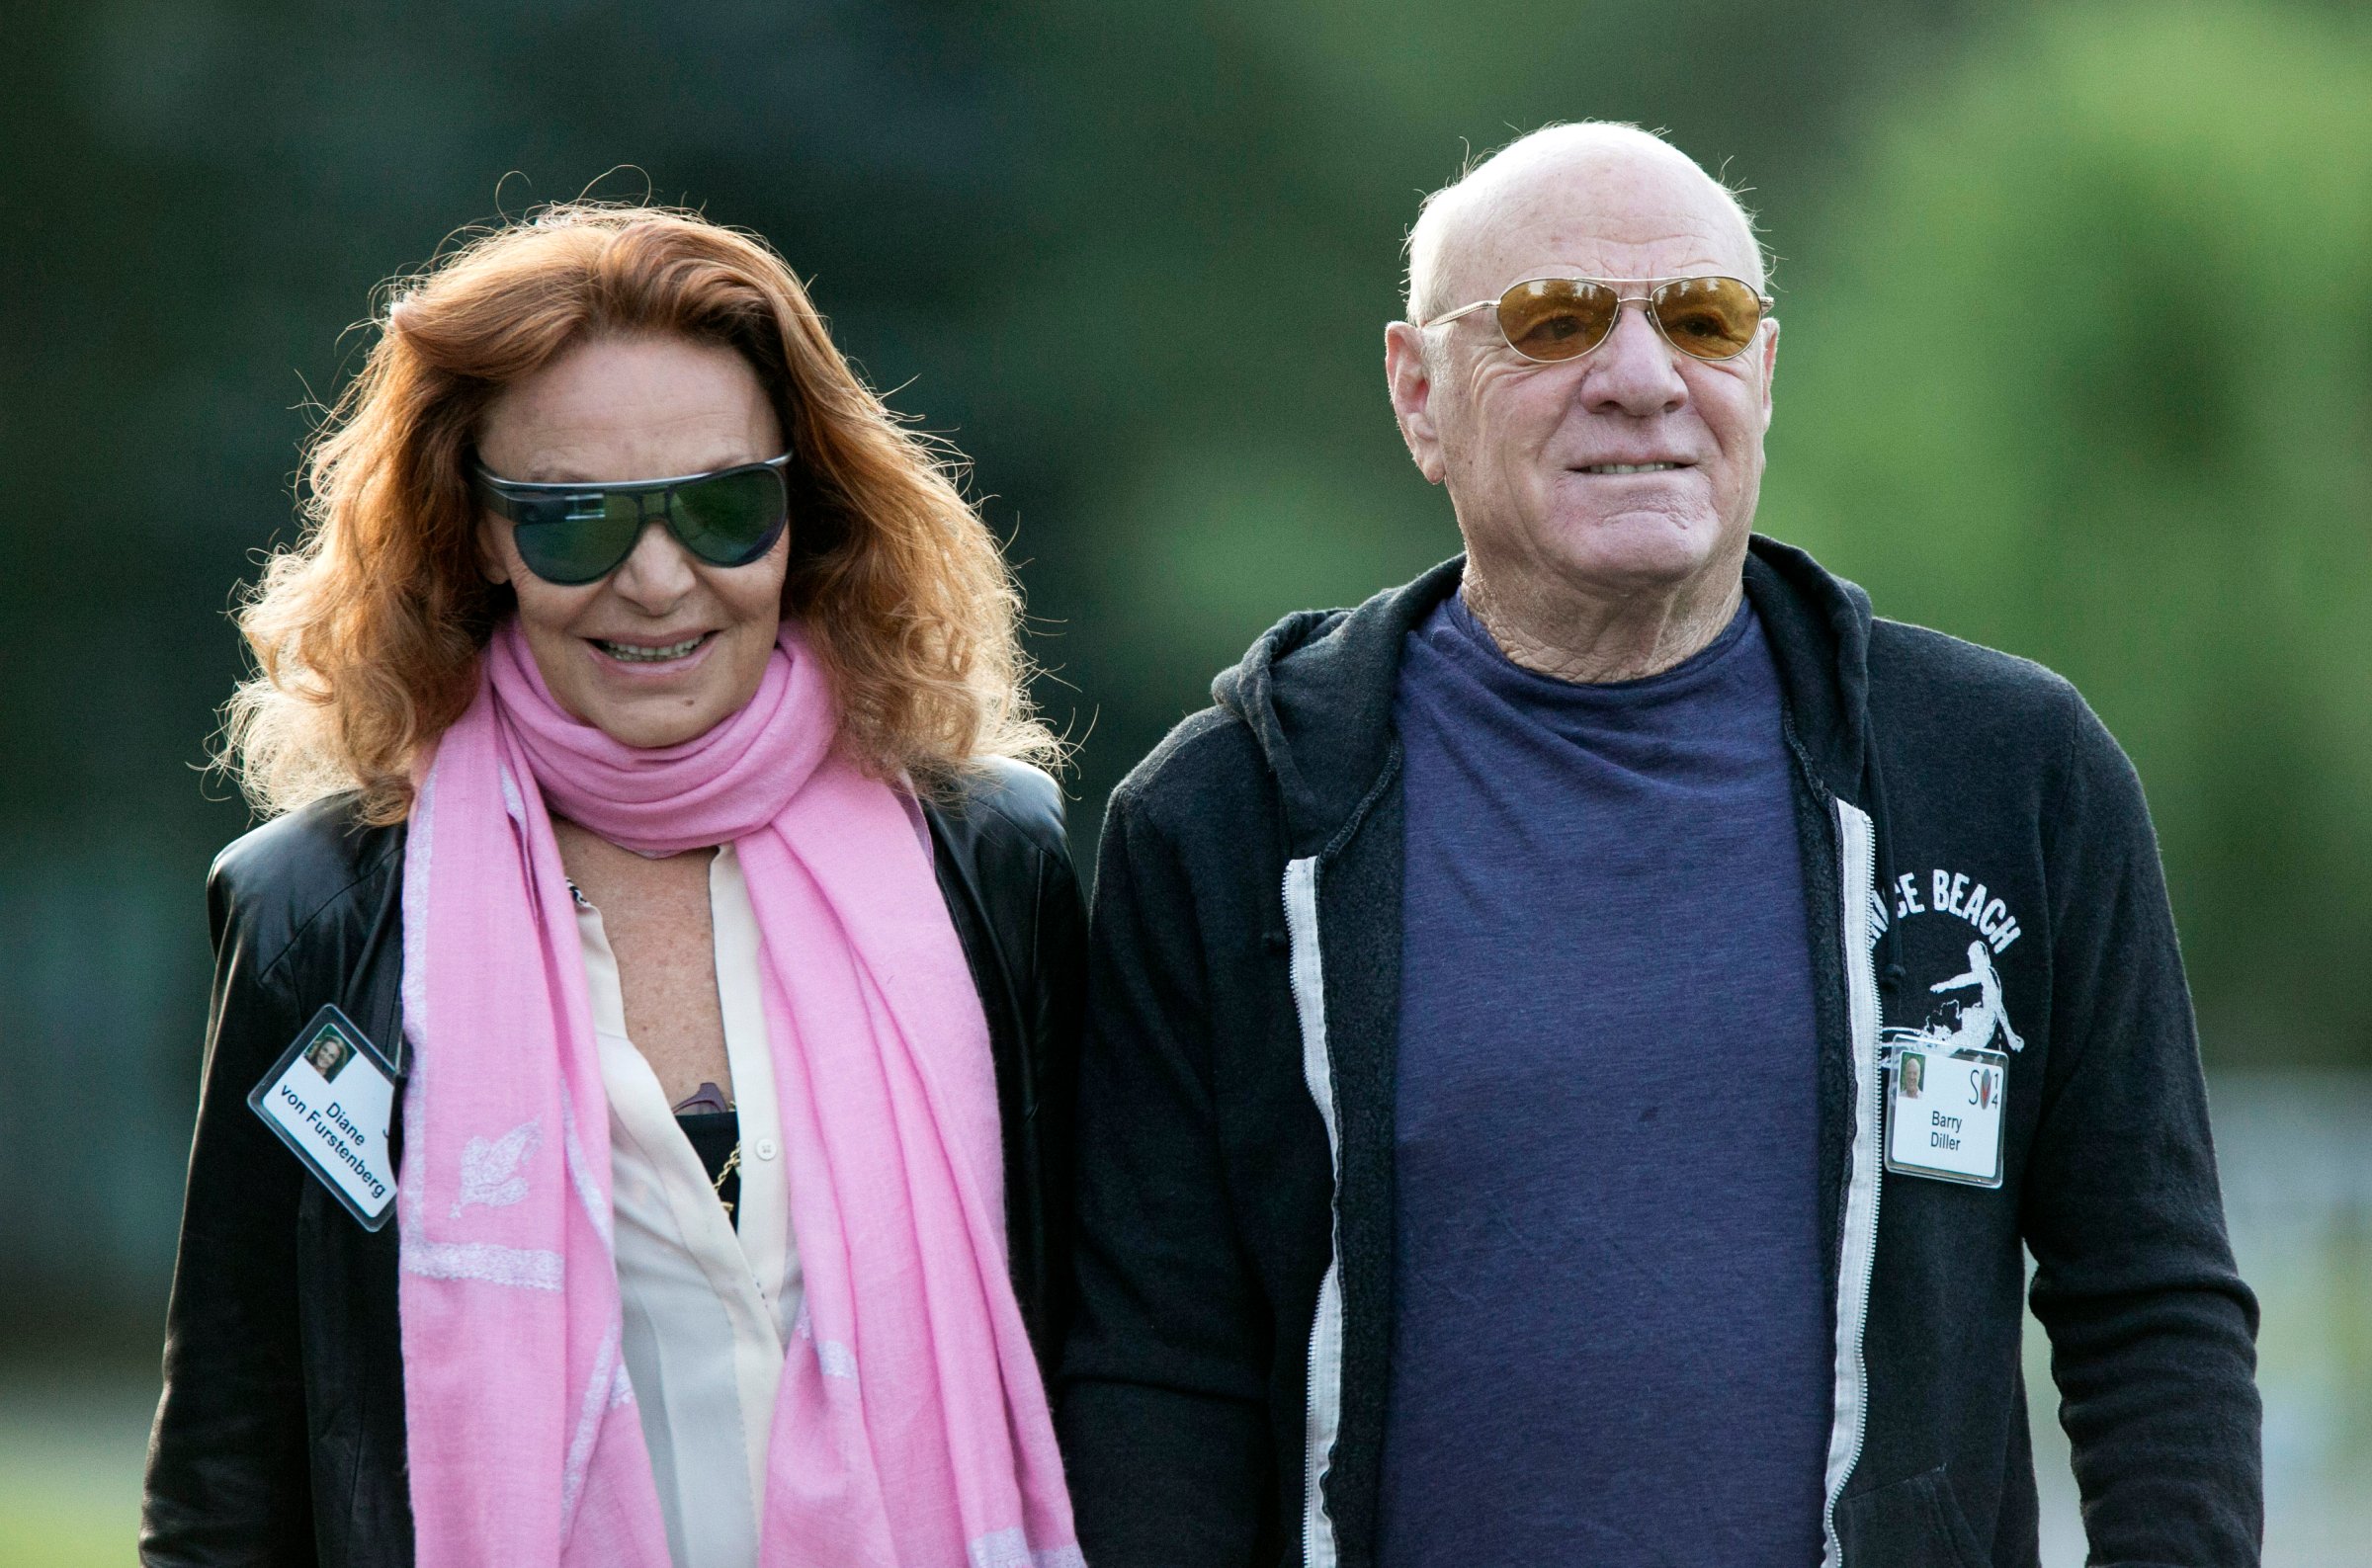 Diane von Furstenberg and Barry Diller, chairman and chief executive officer of IAC/InterActiveCorp, arrive for a morning session during the Allen & Co. Media and Technology Conference in Sun Valley, Idaho on July 11, 2014.